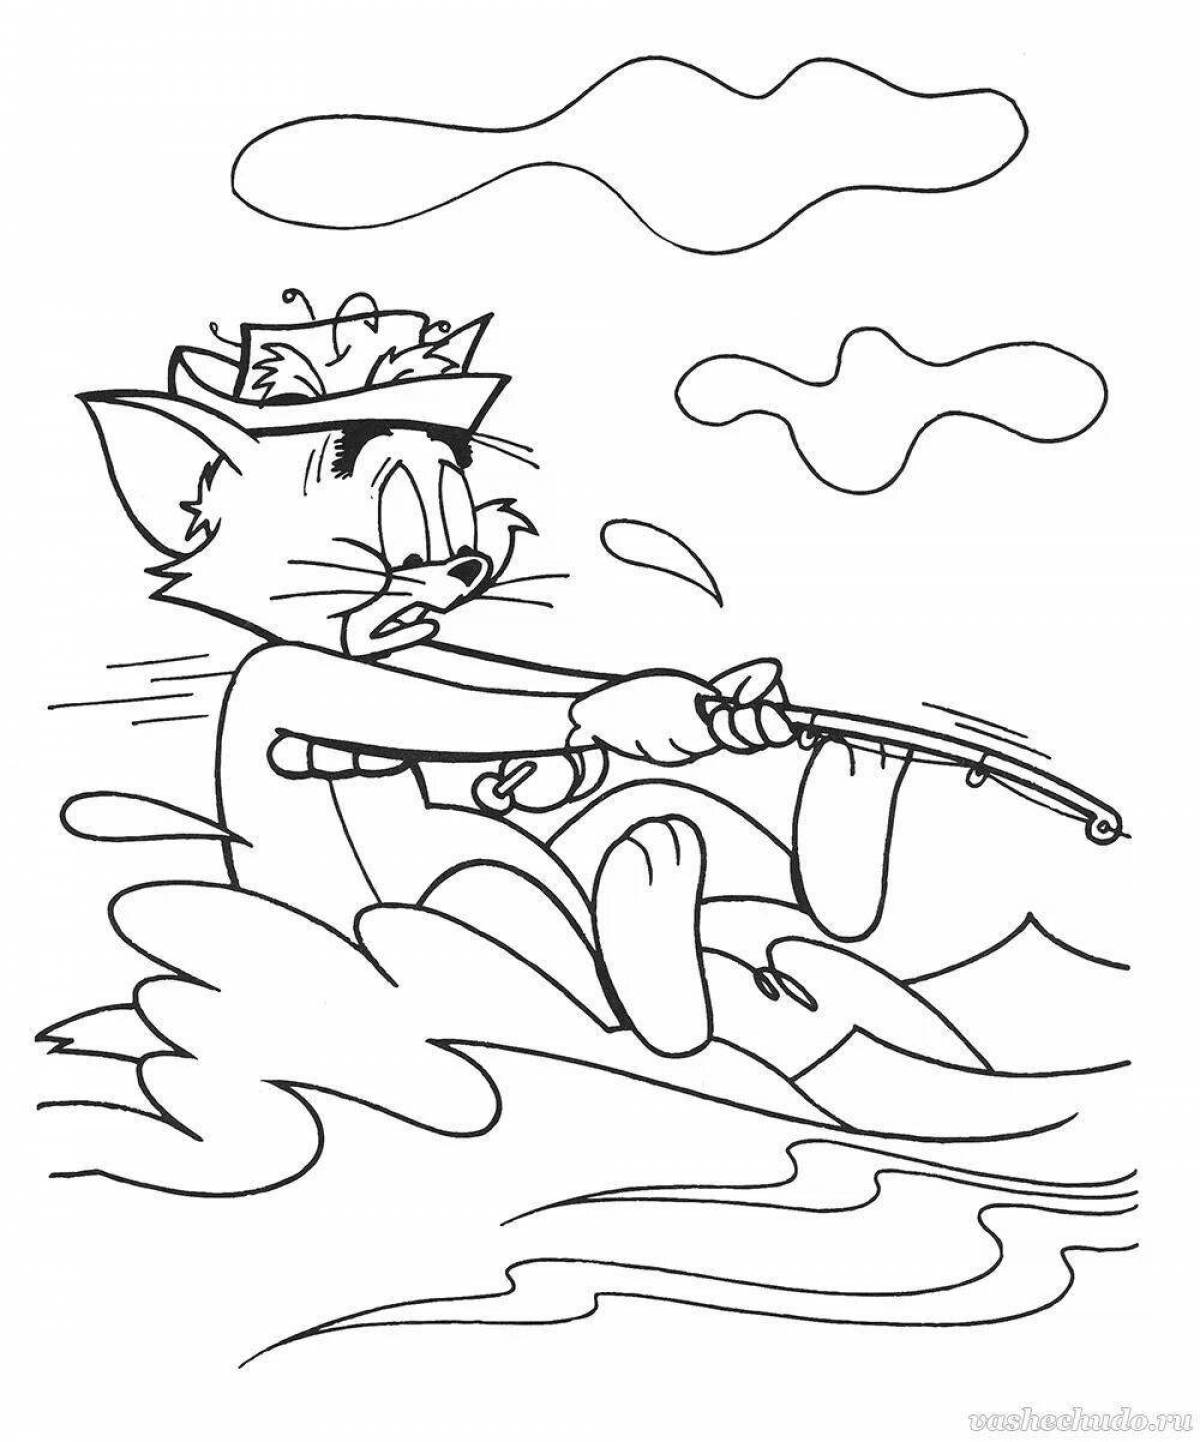 Colourful military cat coloring page